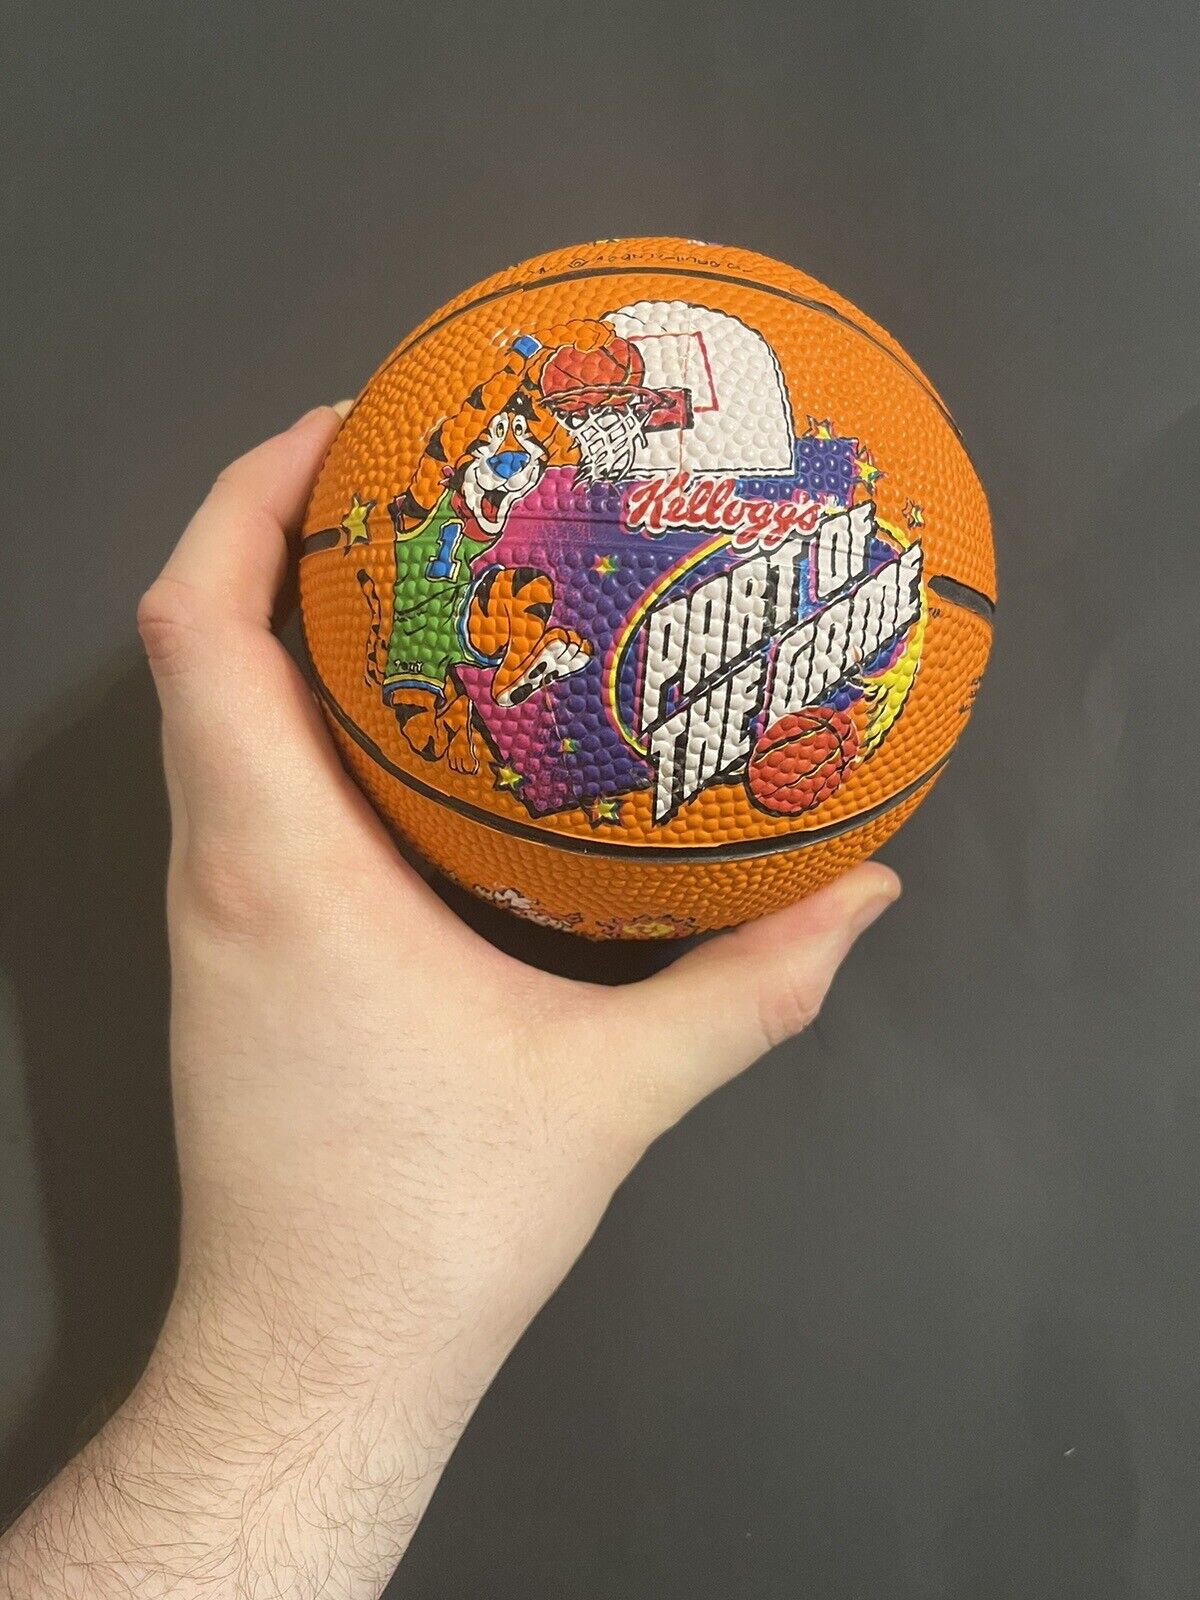 VTG 1990\'s Kellogg’s Promo Ball Part Of The Game Toy Basketball Tony The Tiger